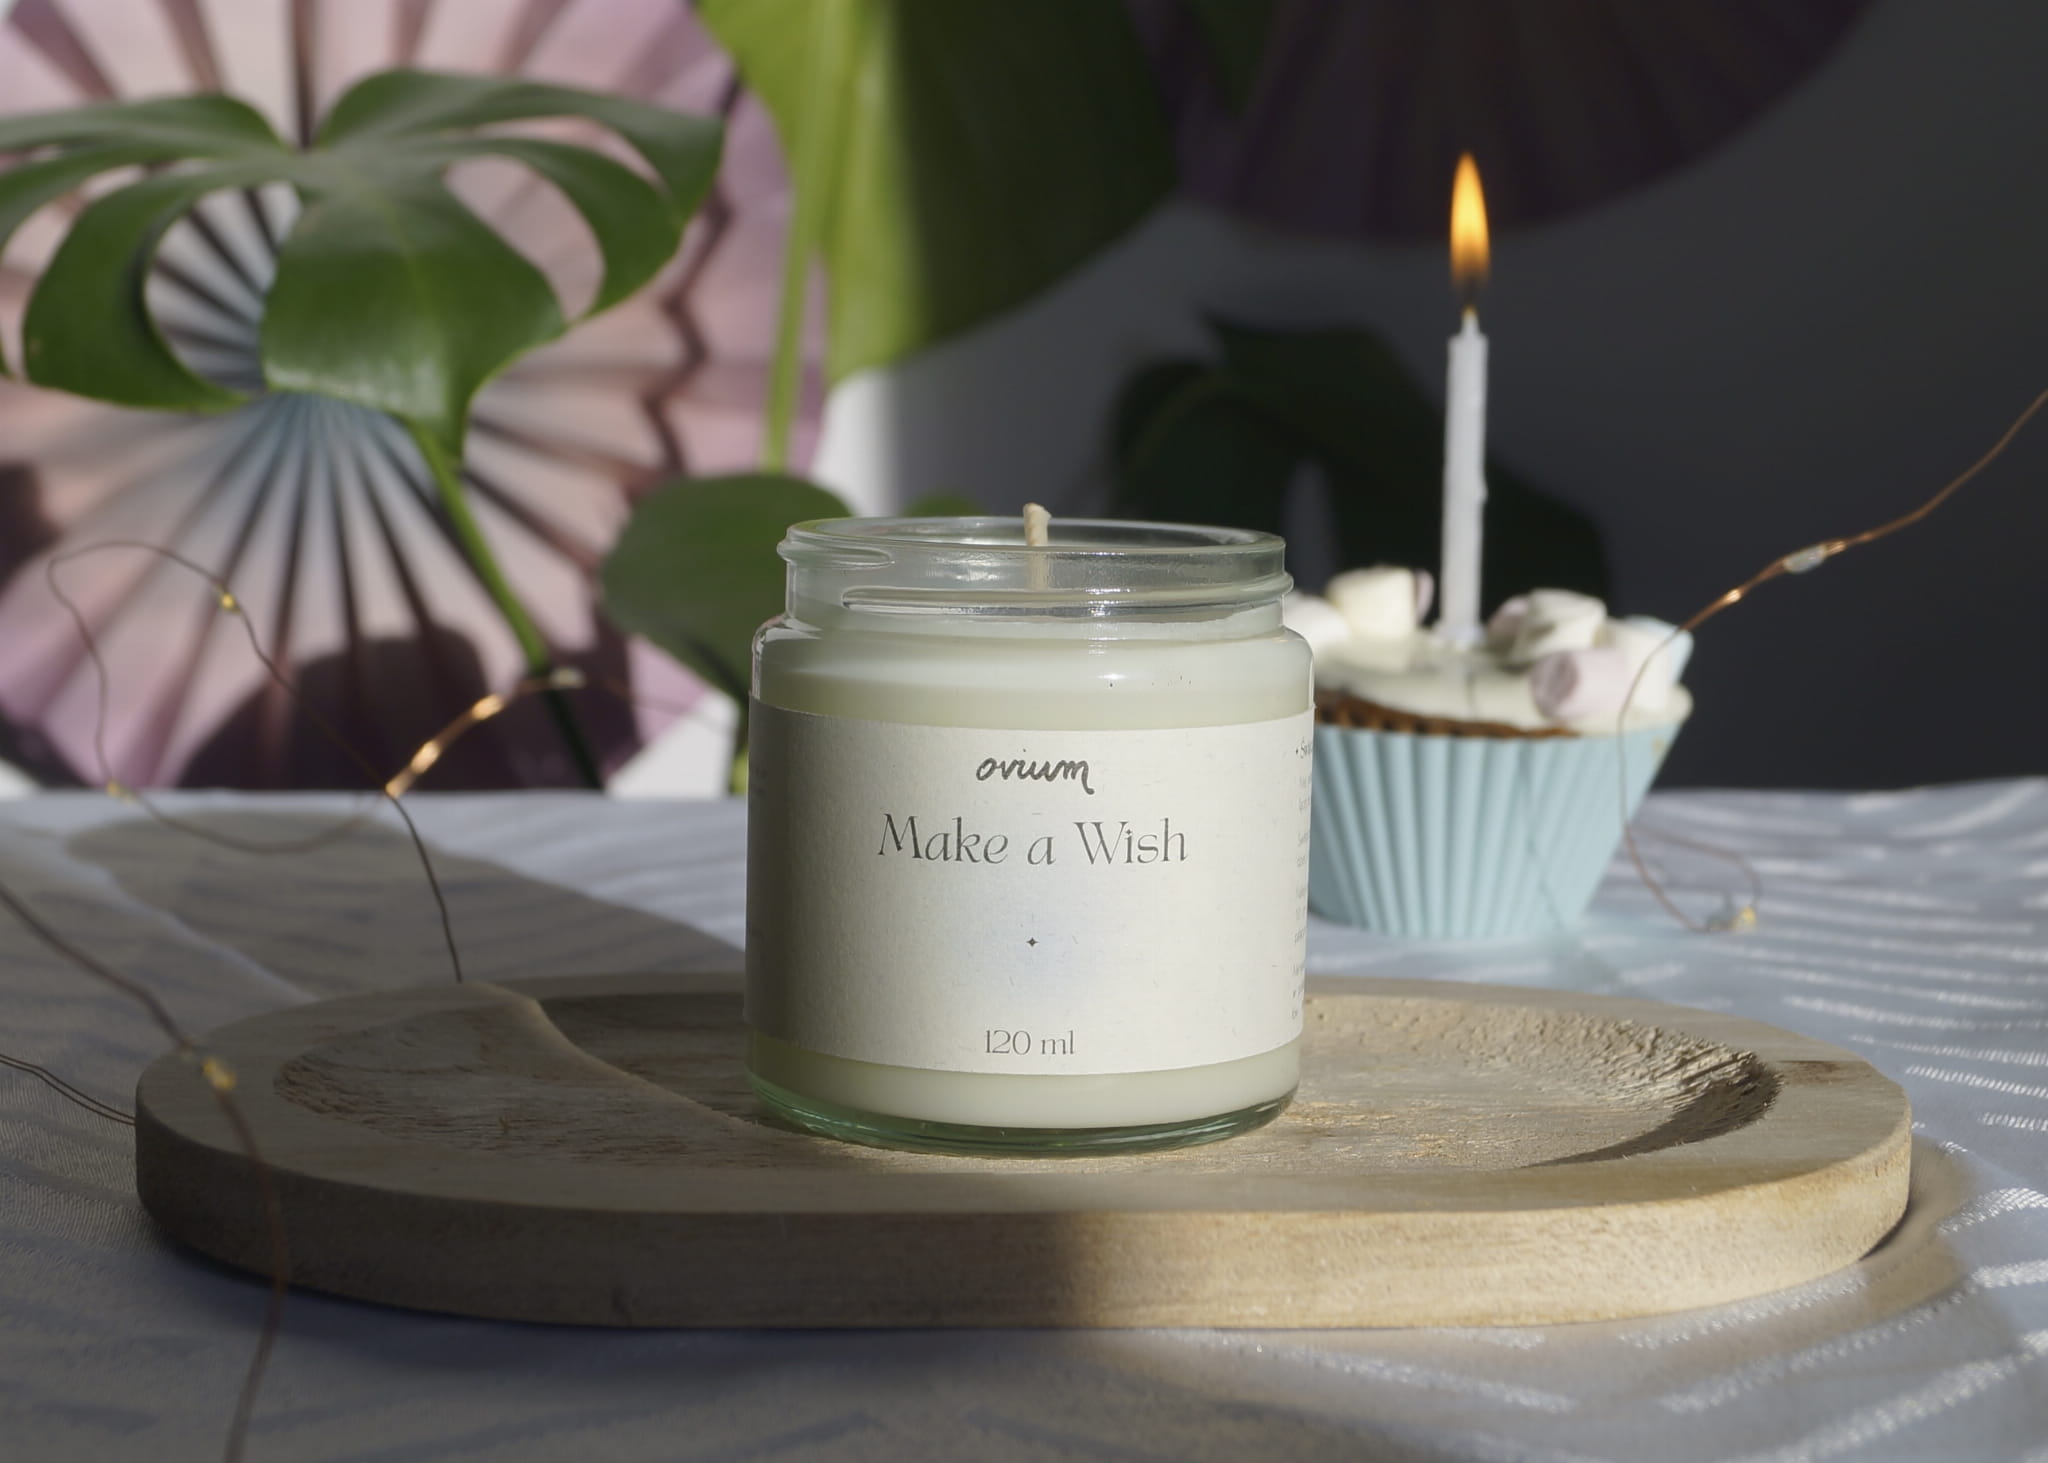 Elevate your atmosphere with handcrafted soy candles that bring a touch of uniqueness to any room. Shine bright!